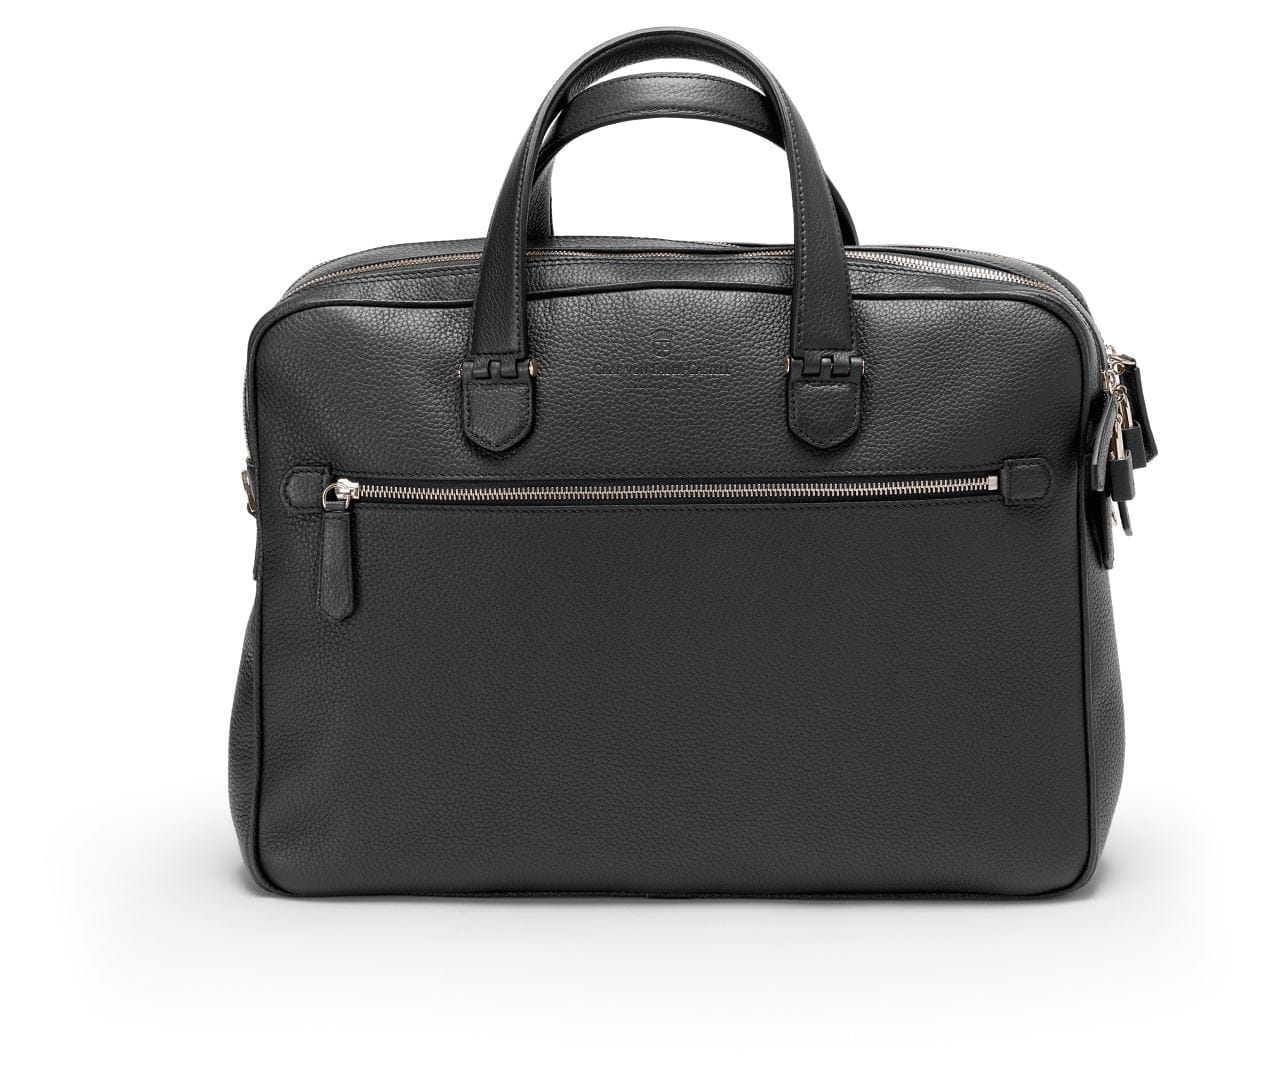 Graf-von-Faber-Castell - Briefcase Cashmere with two compartments, Black